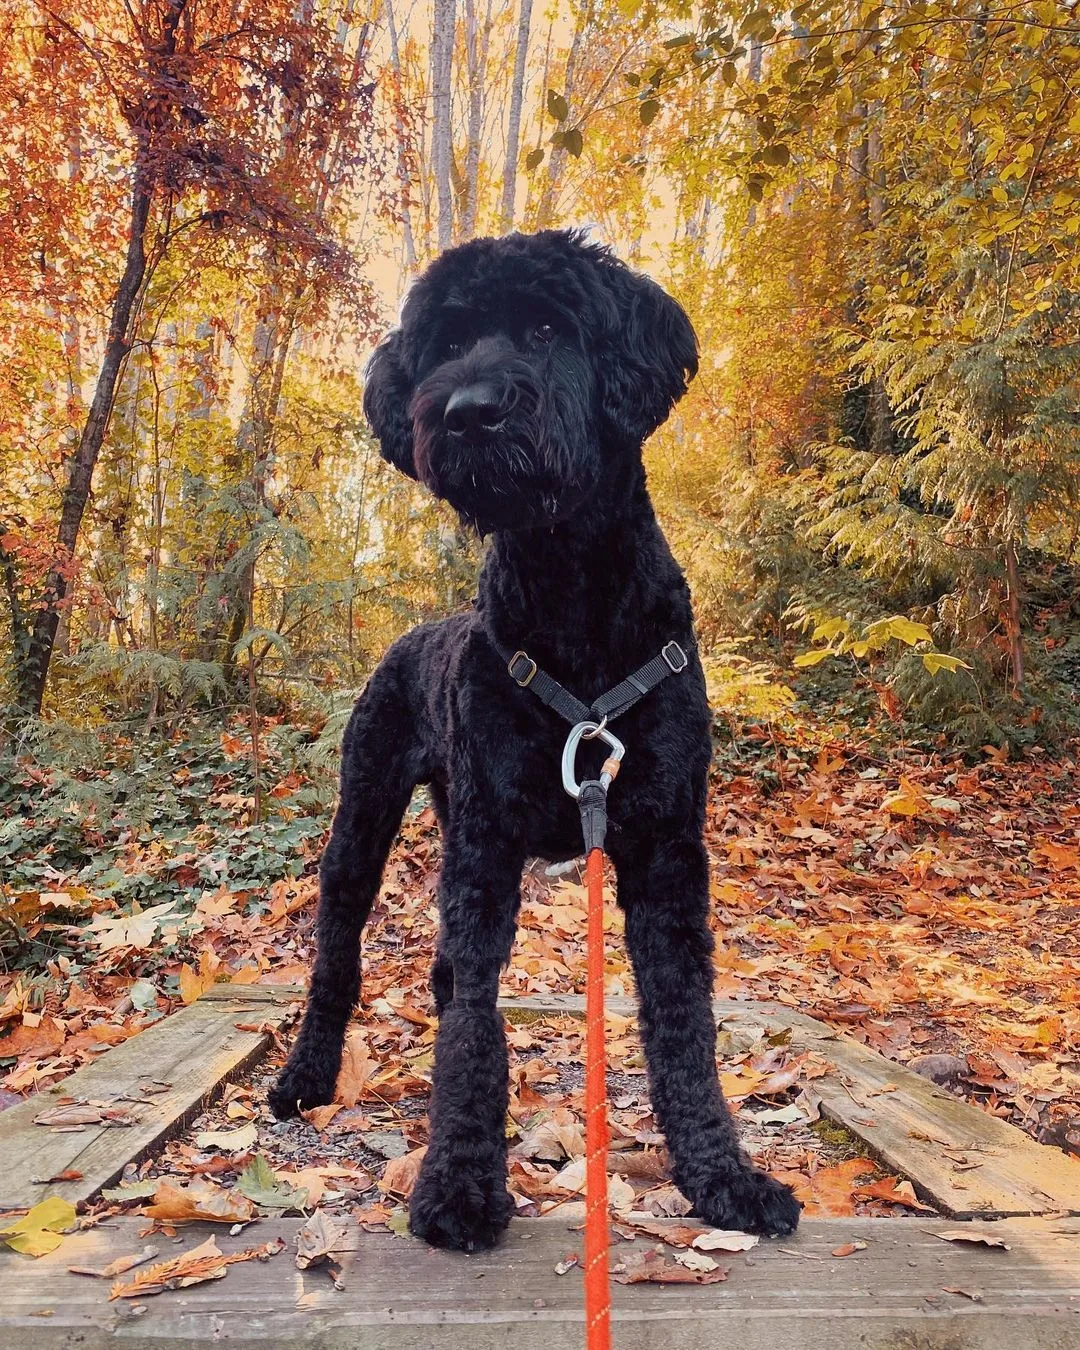 The Giant Schnoodle is standing in the forest